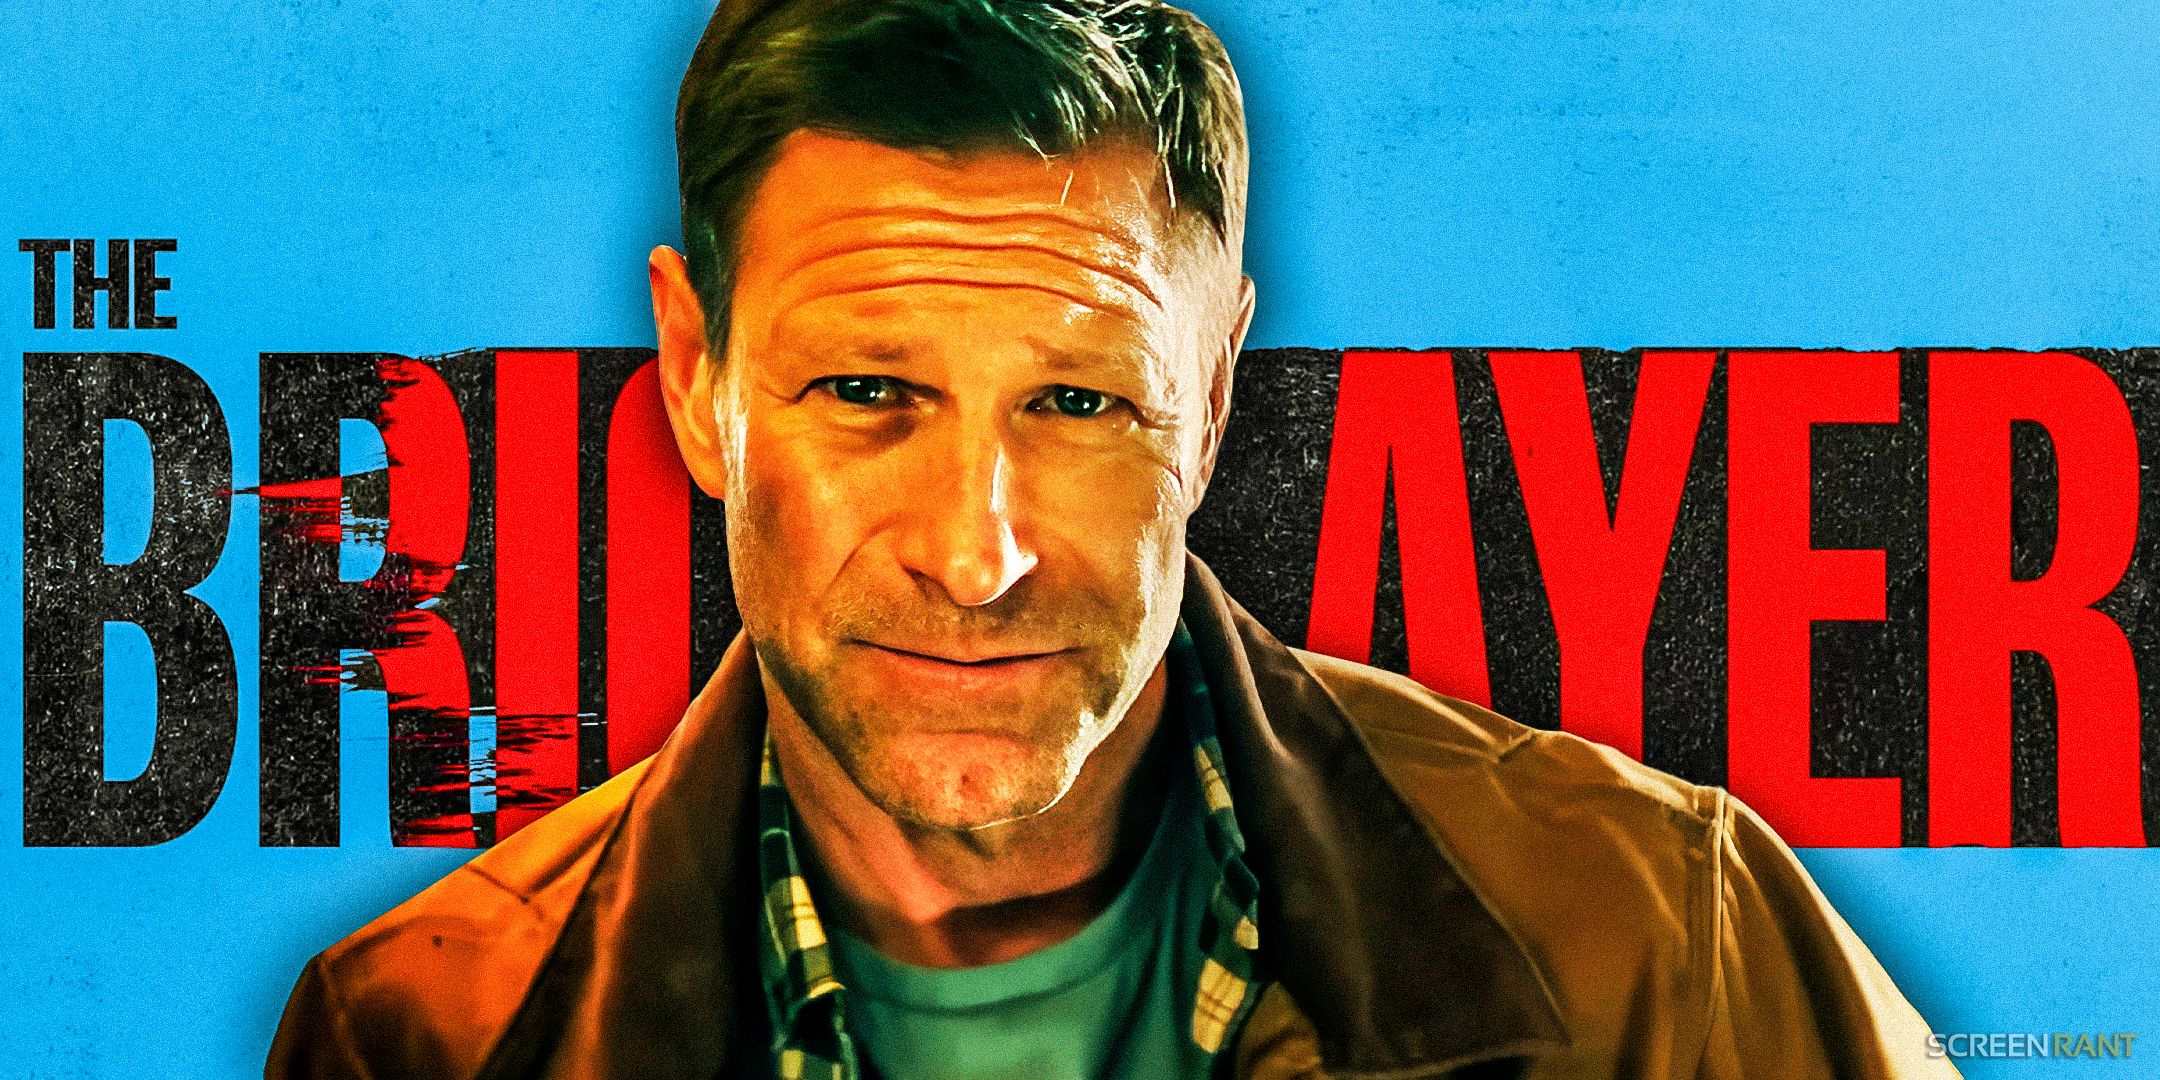 Aaron Eckhart as Steve Vail against The Bricklayer title backdrop